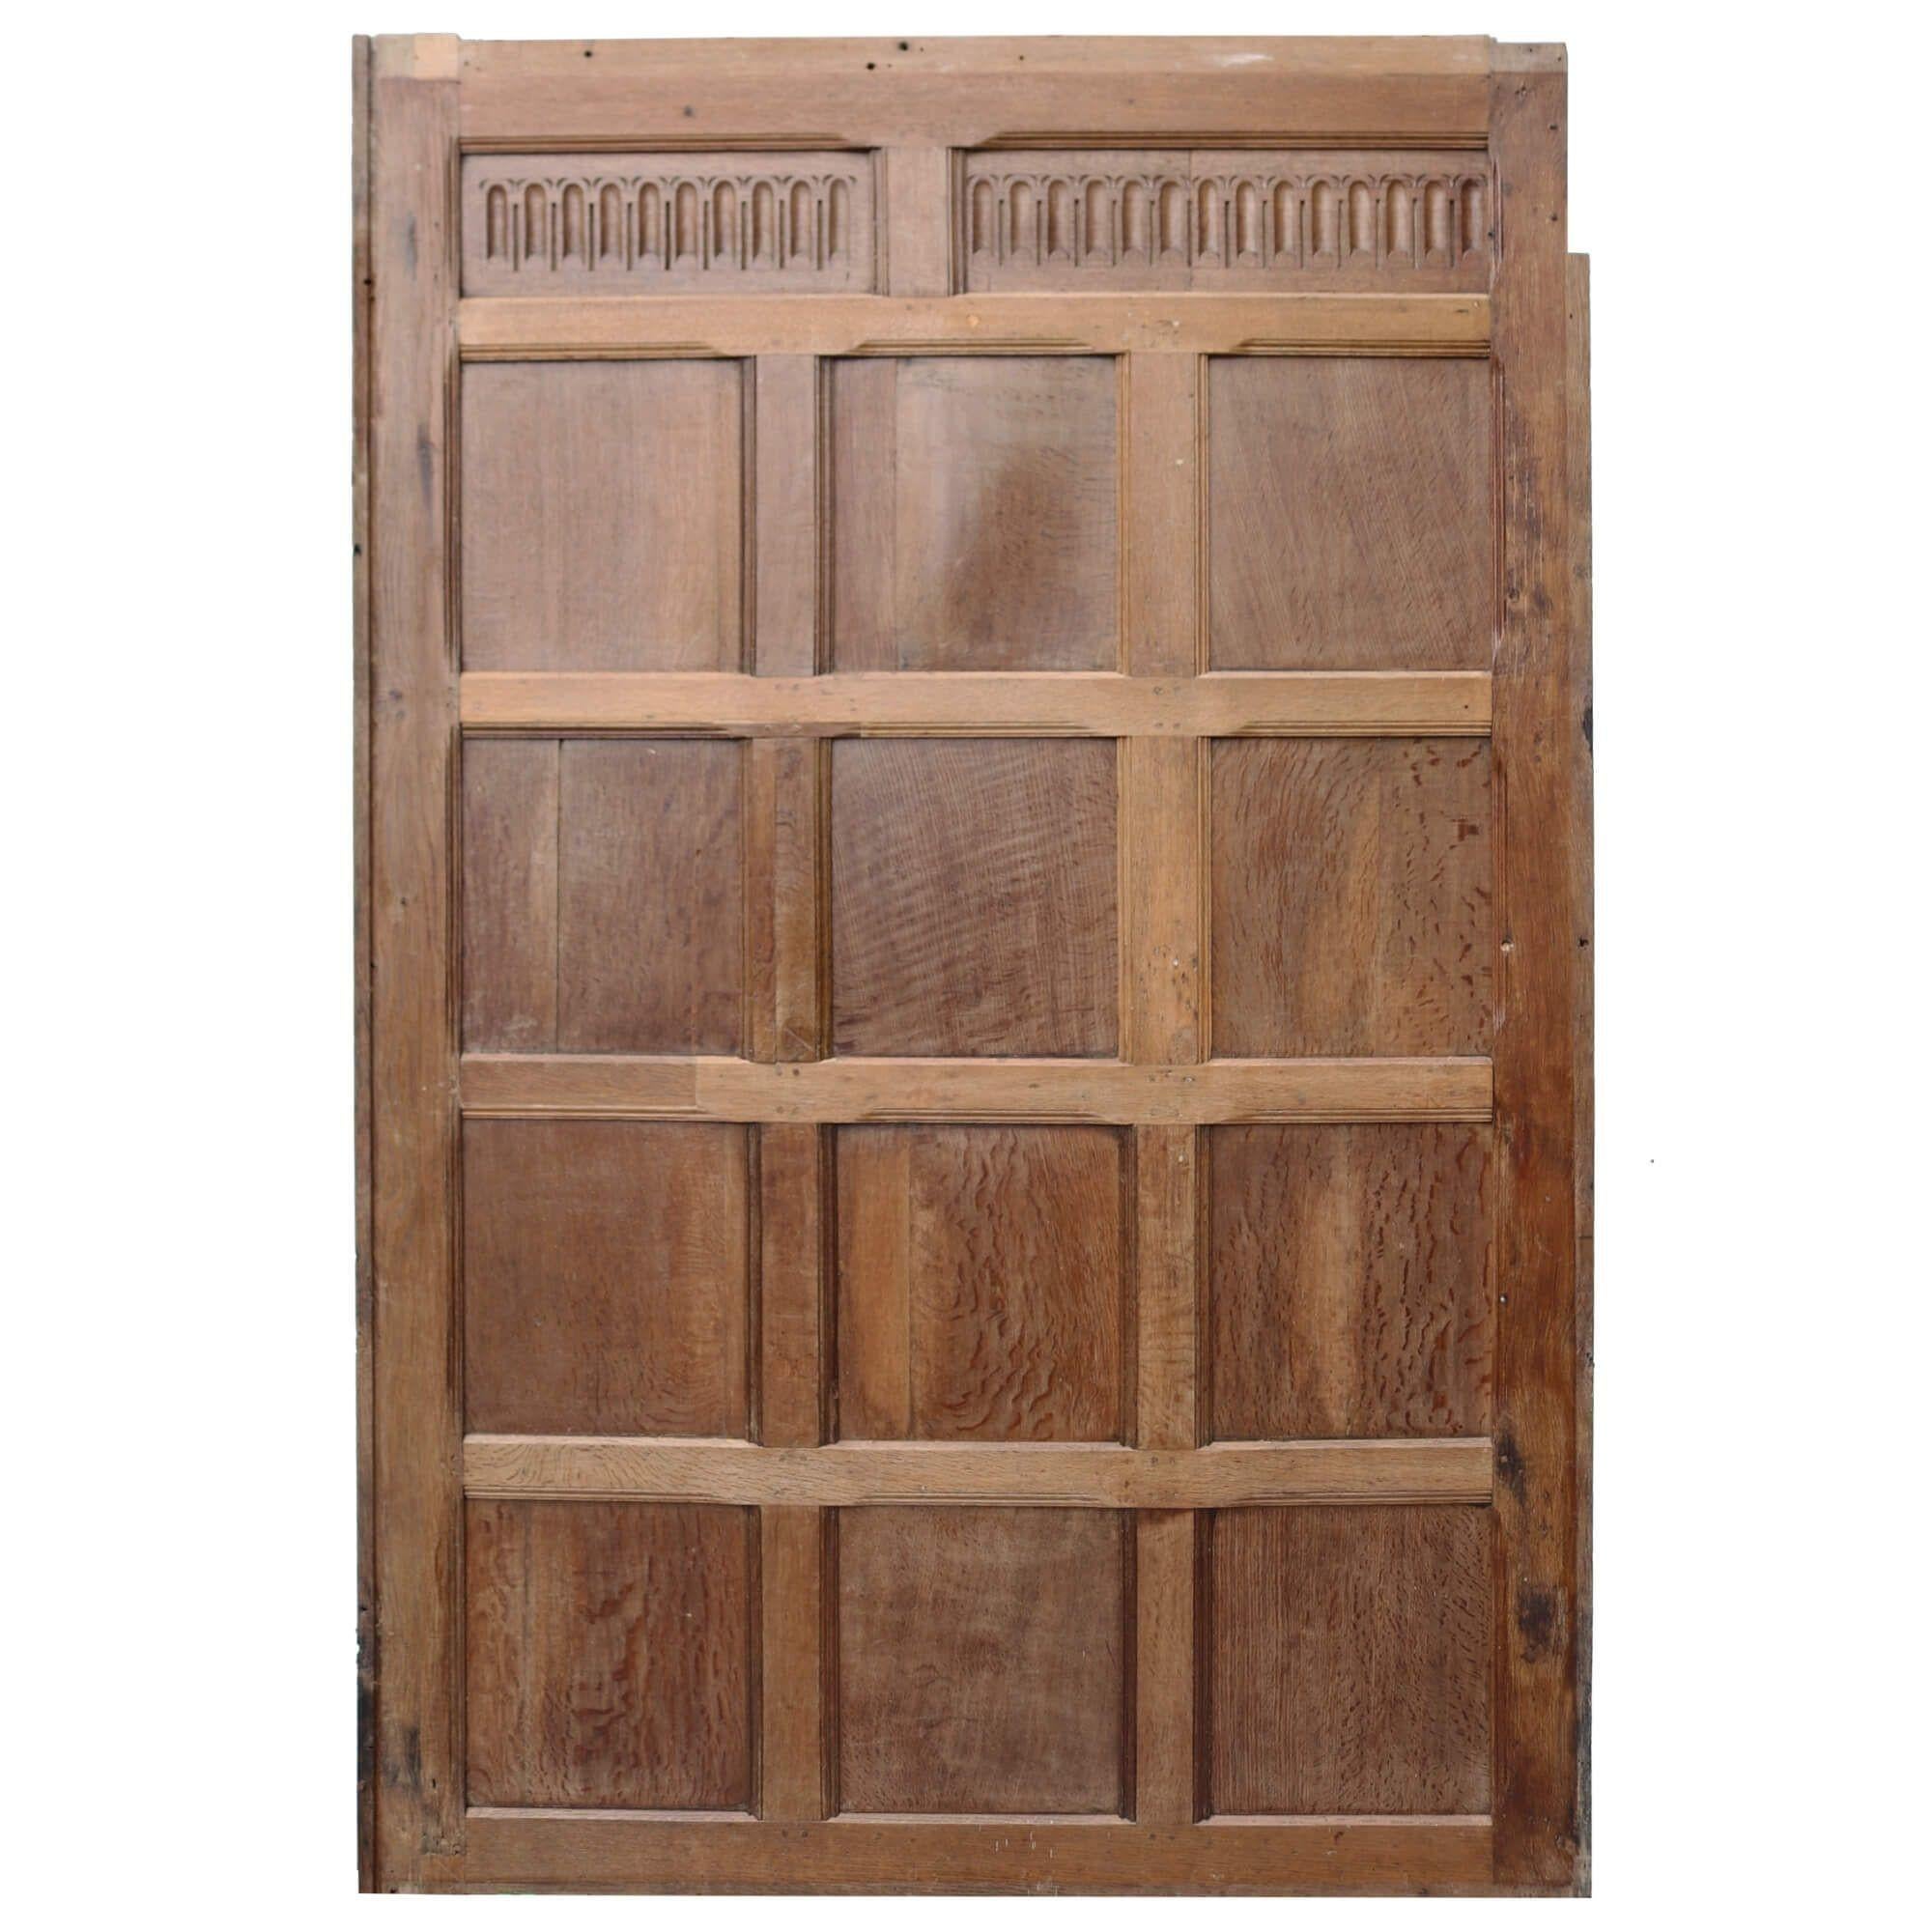 Run of Full Height English Jacobean Style Oak Wall Paneling In Fair Condition For Sale In Wormelow, Herefordshire